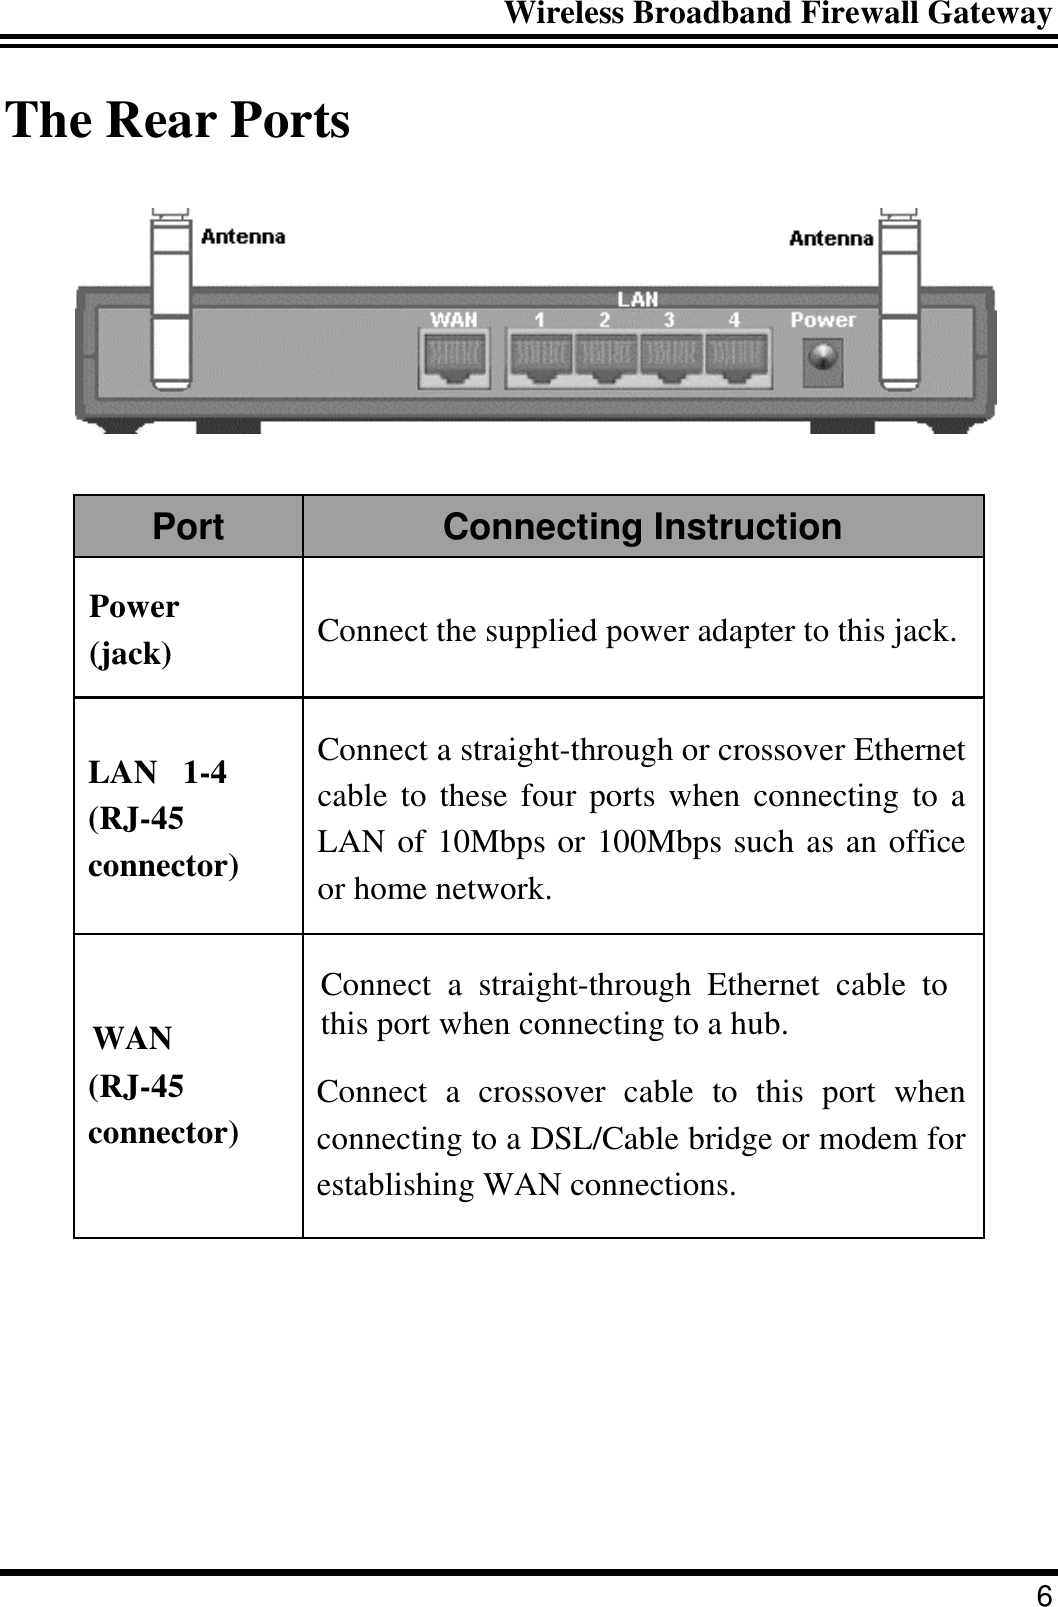 Wireless Broadband Firewall Gateway 6 The Rear Ports  Port  Connecting Instruction Power (jack)  Connect the supplied power adapter to this jack. LAN   1-4 (RJ-45 connector) Connect a straight-through or crossover Ethernet cable to these four ports when connecting to a LAN of 10Mbps or 100Mbps such as an office or home network. WAN (RJ-45 connector) Connect a straight-through Ethernet cable to this port when connecting to a hub. Connect a crossover cable to this port when connecting to a DSL/Cable bridge or modem for establishing WAN connections.  